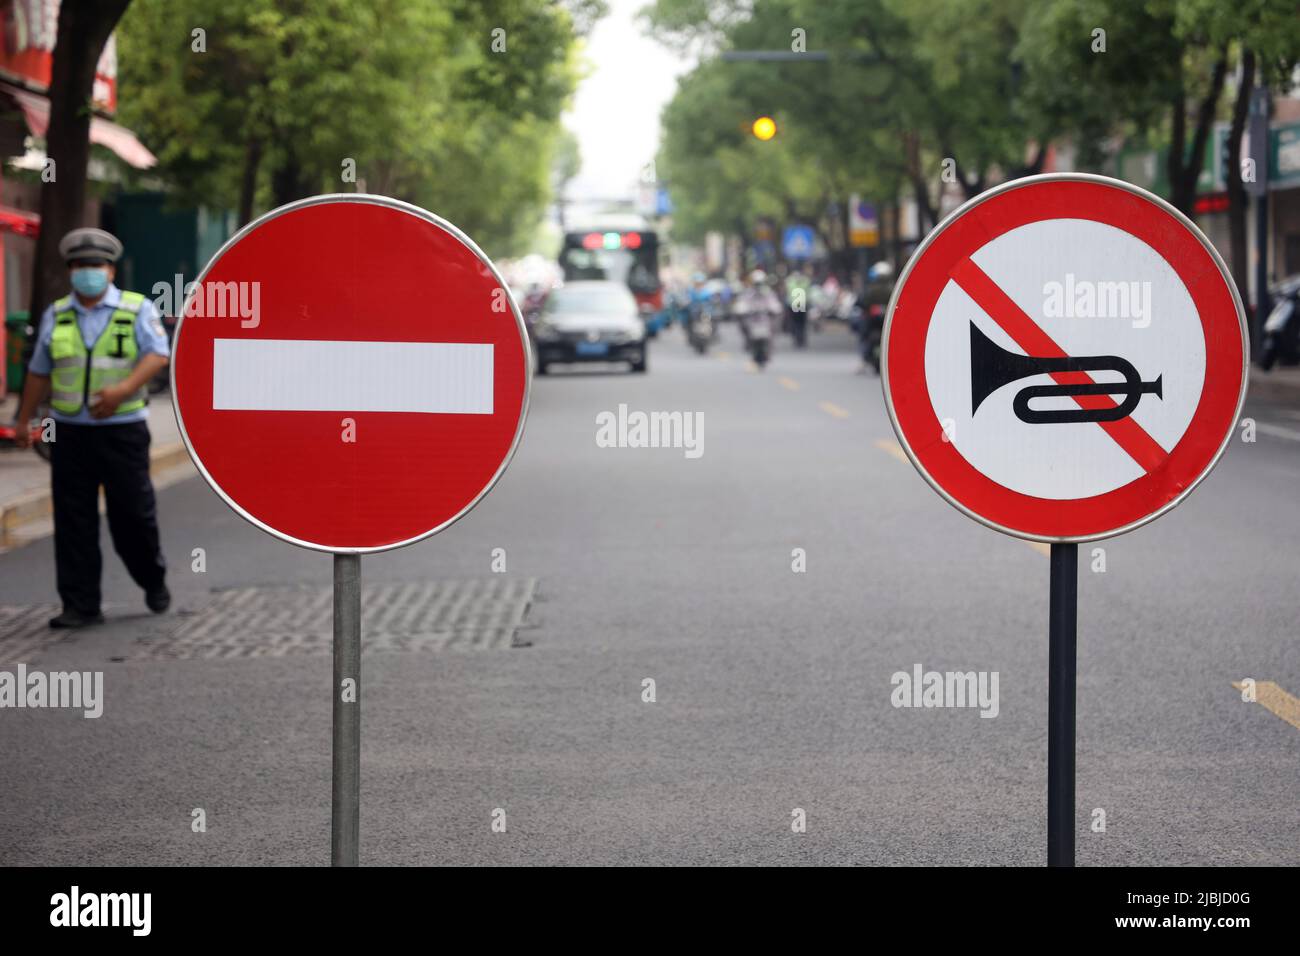 NANTONG, CHINA - JUNE 7, 2022 - A sign banning the honking of horns is placed outside the exam site of Nantong Middle School, the 2021 Jiangsu Provinc Stock Photo